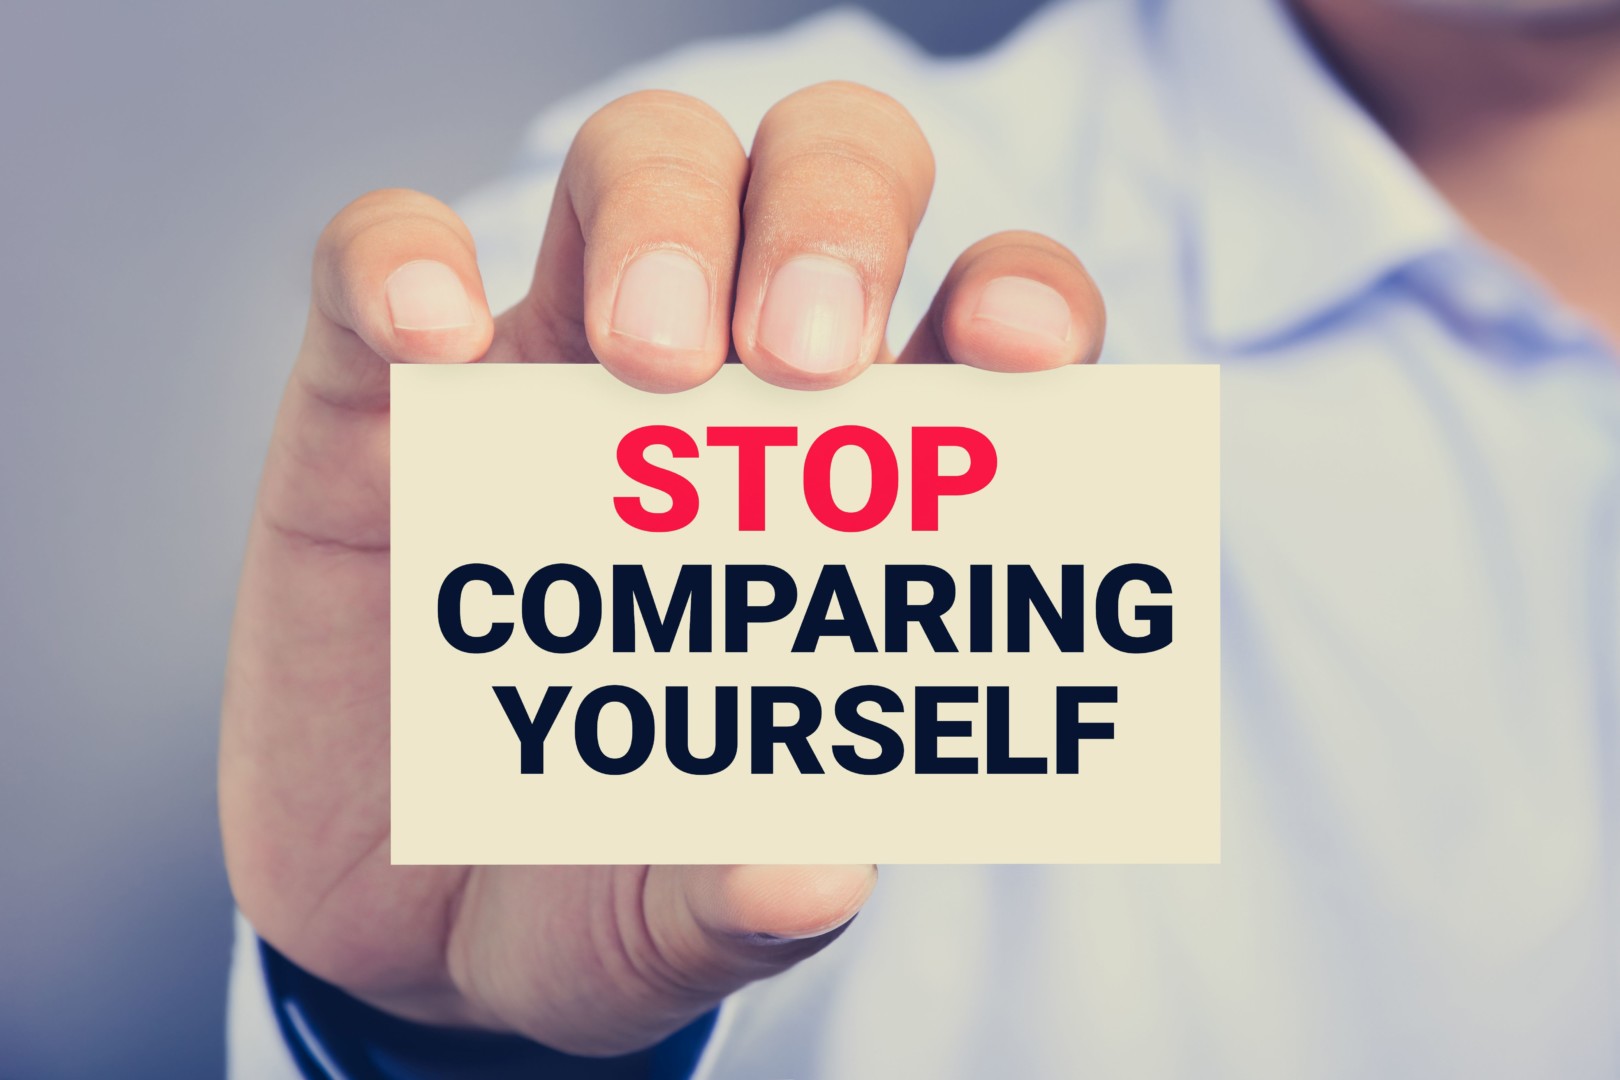 Stop Comparing Yourself, Message On The Card Shown By A Man